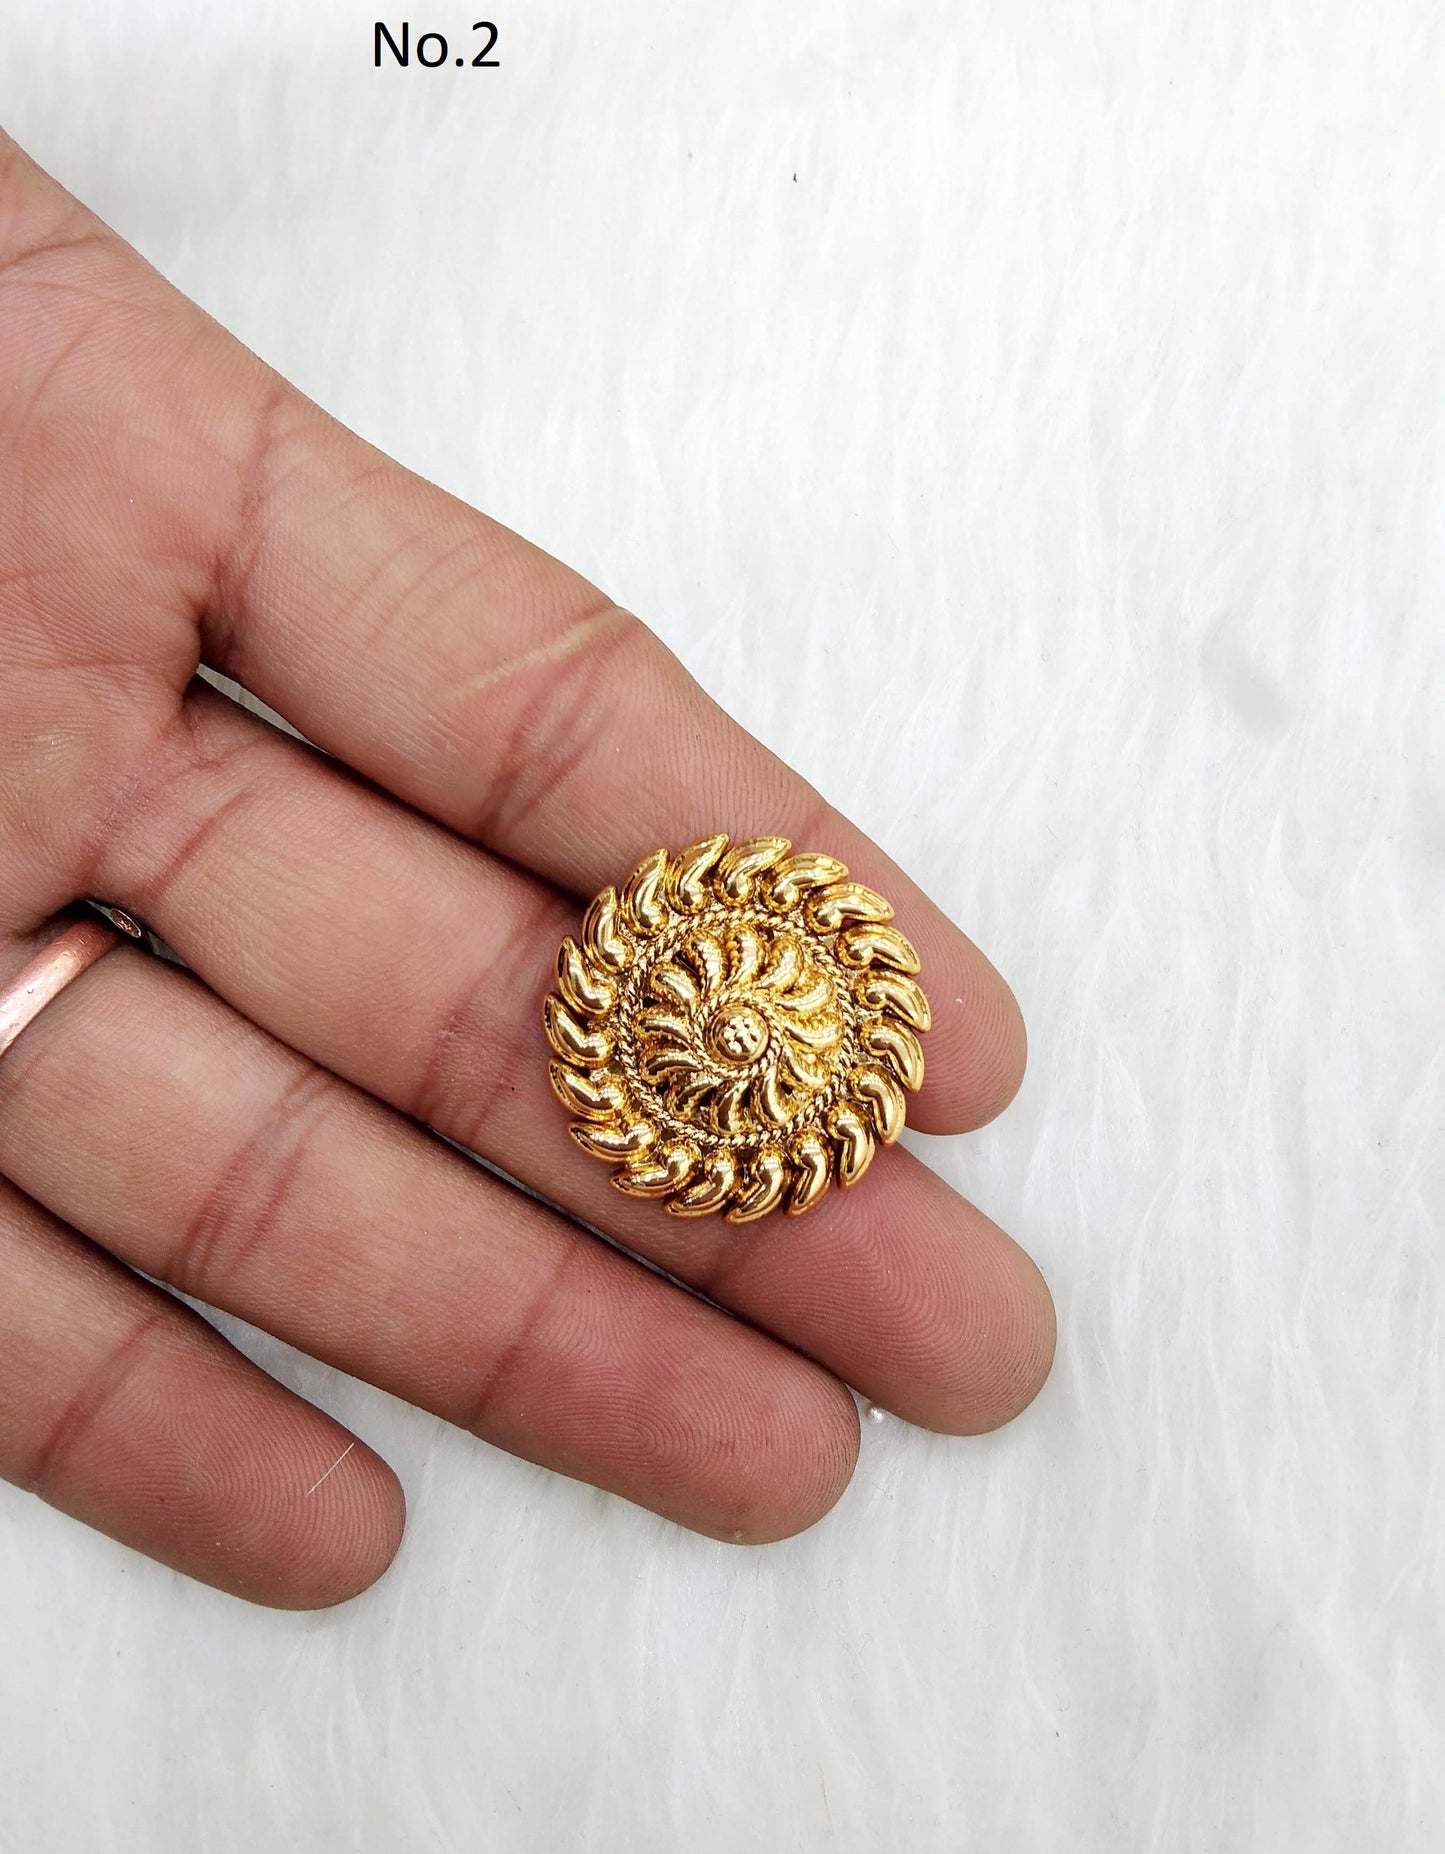 Indian Ring /gold finish Finger rings round bridal cocktail ring hand accessory